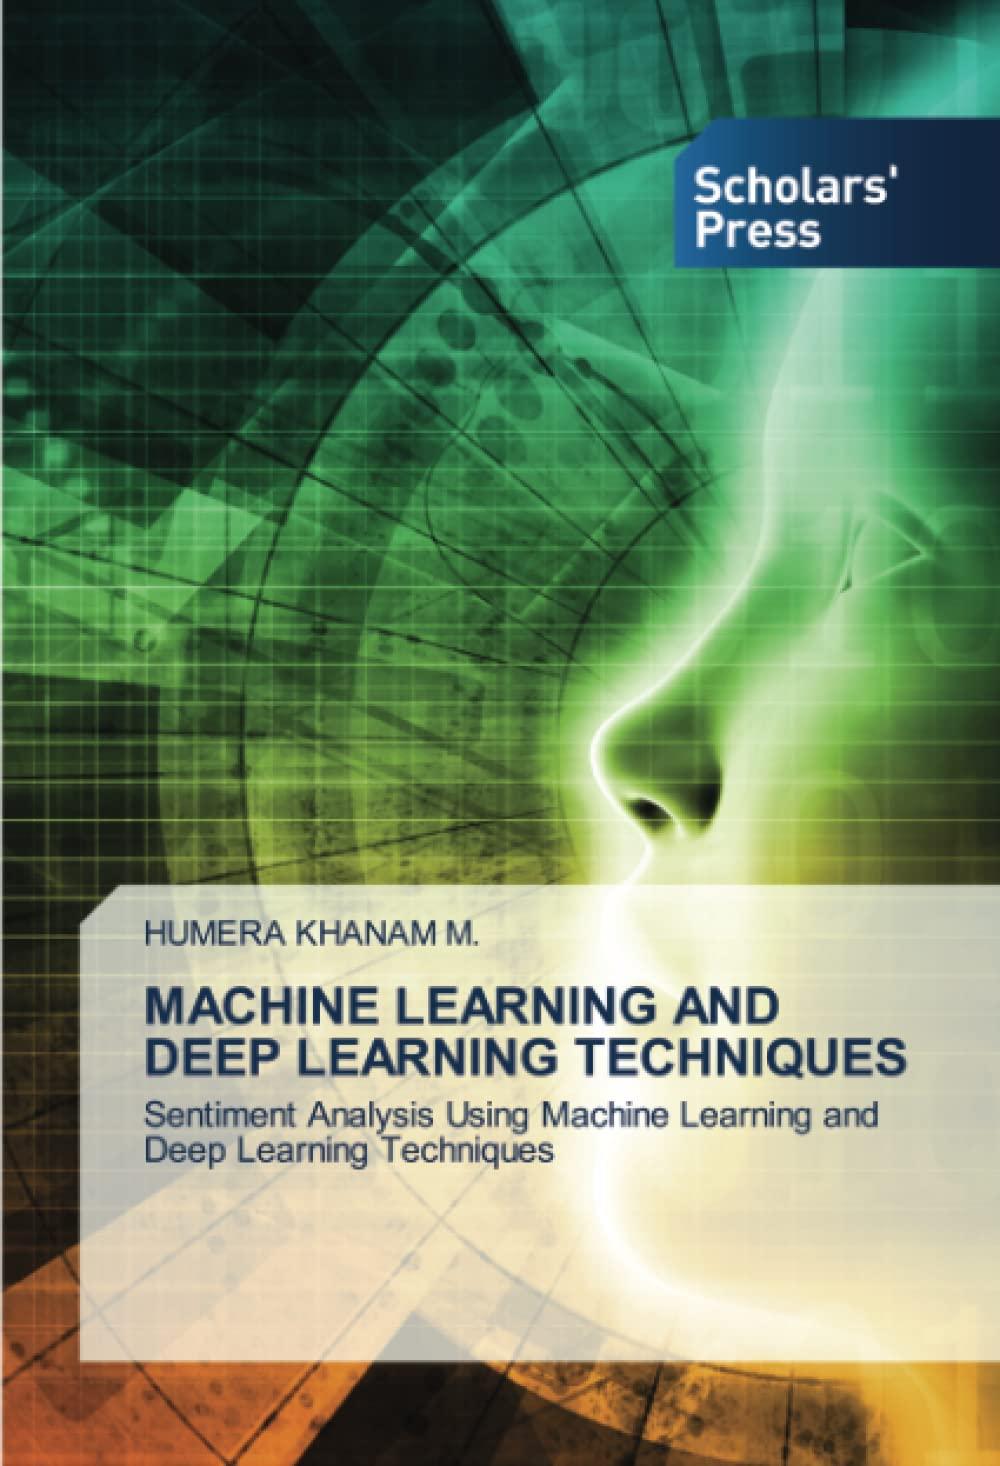 machine learning and deep learning techniques sentiment analysis using machine learning and deep learning